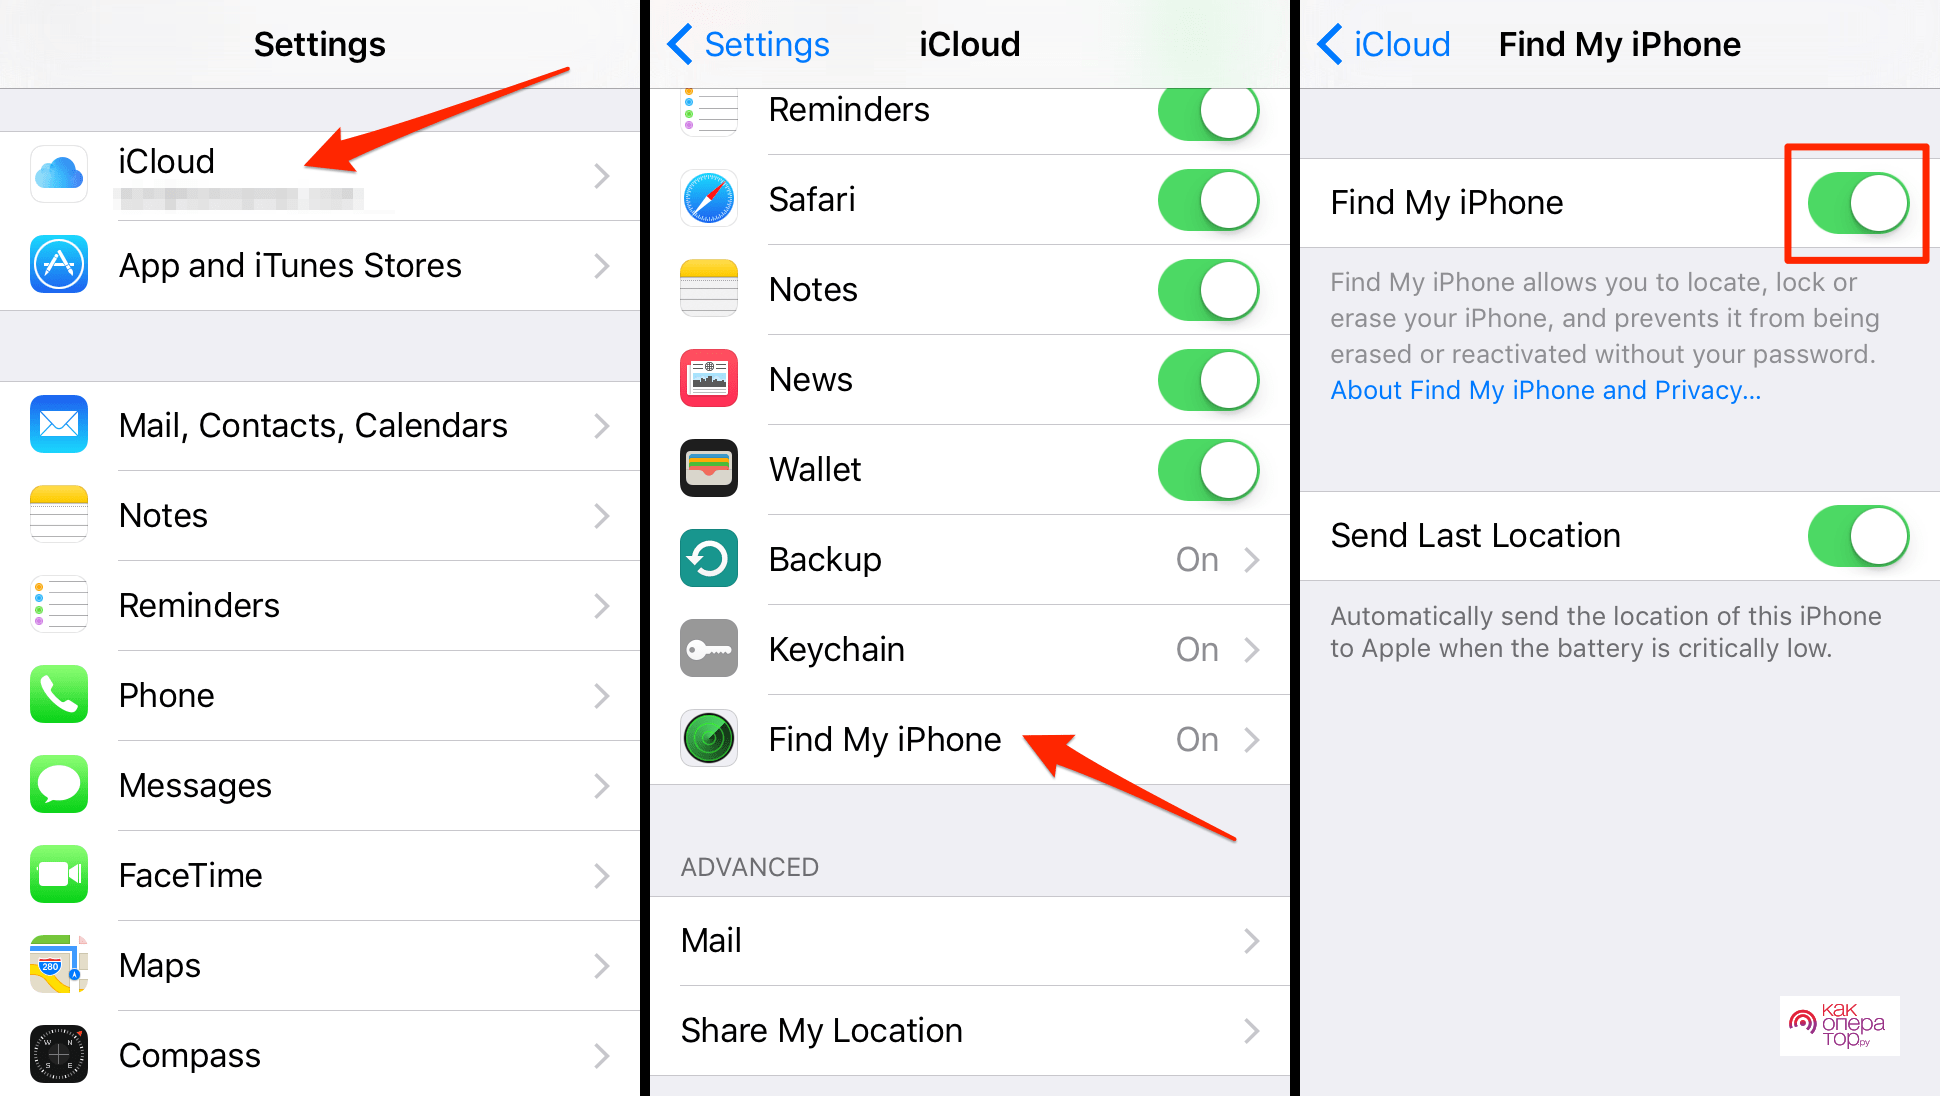 How to "Find My iPhone" with iCloud